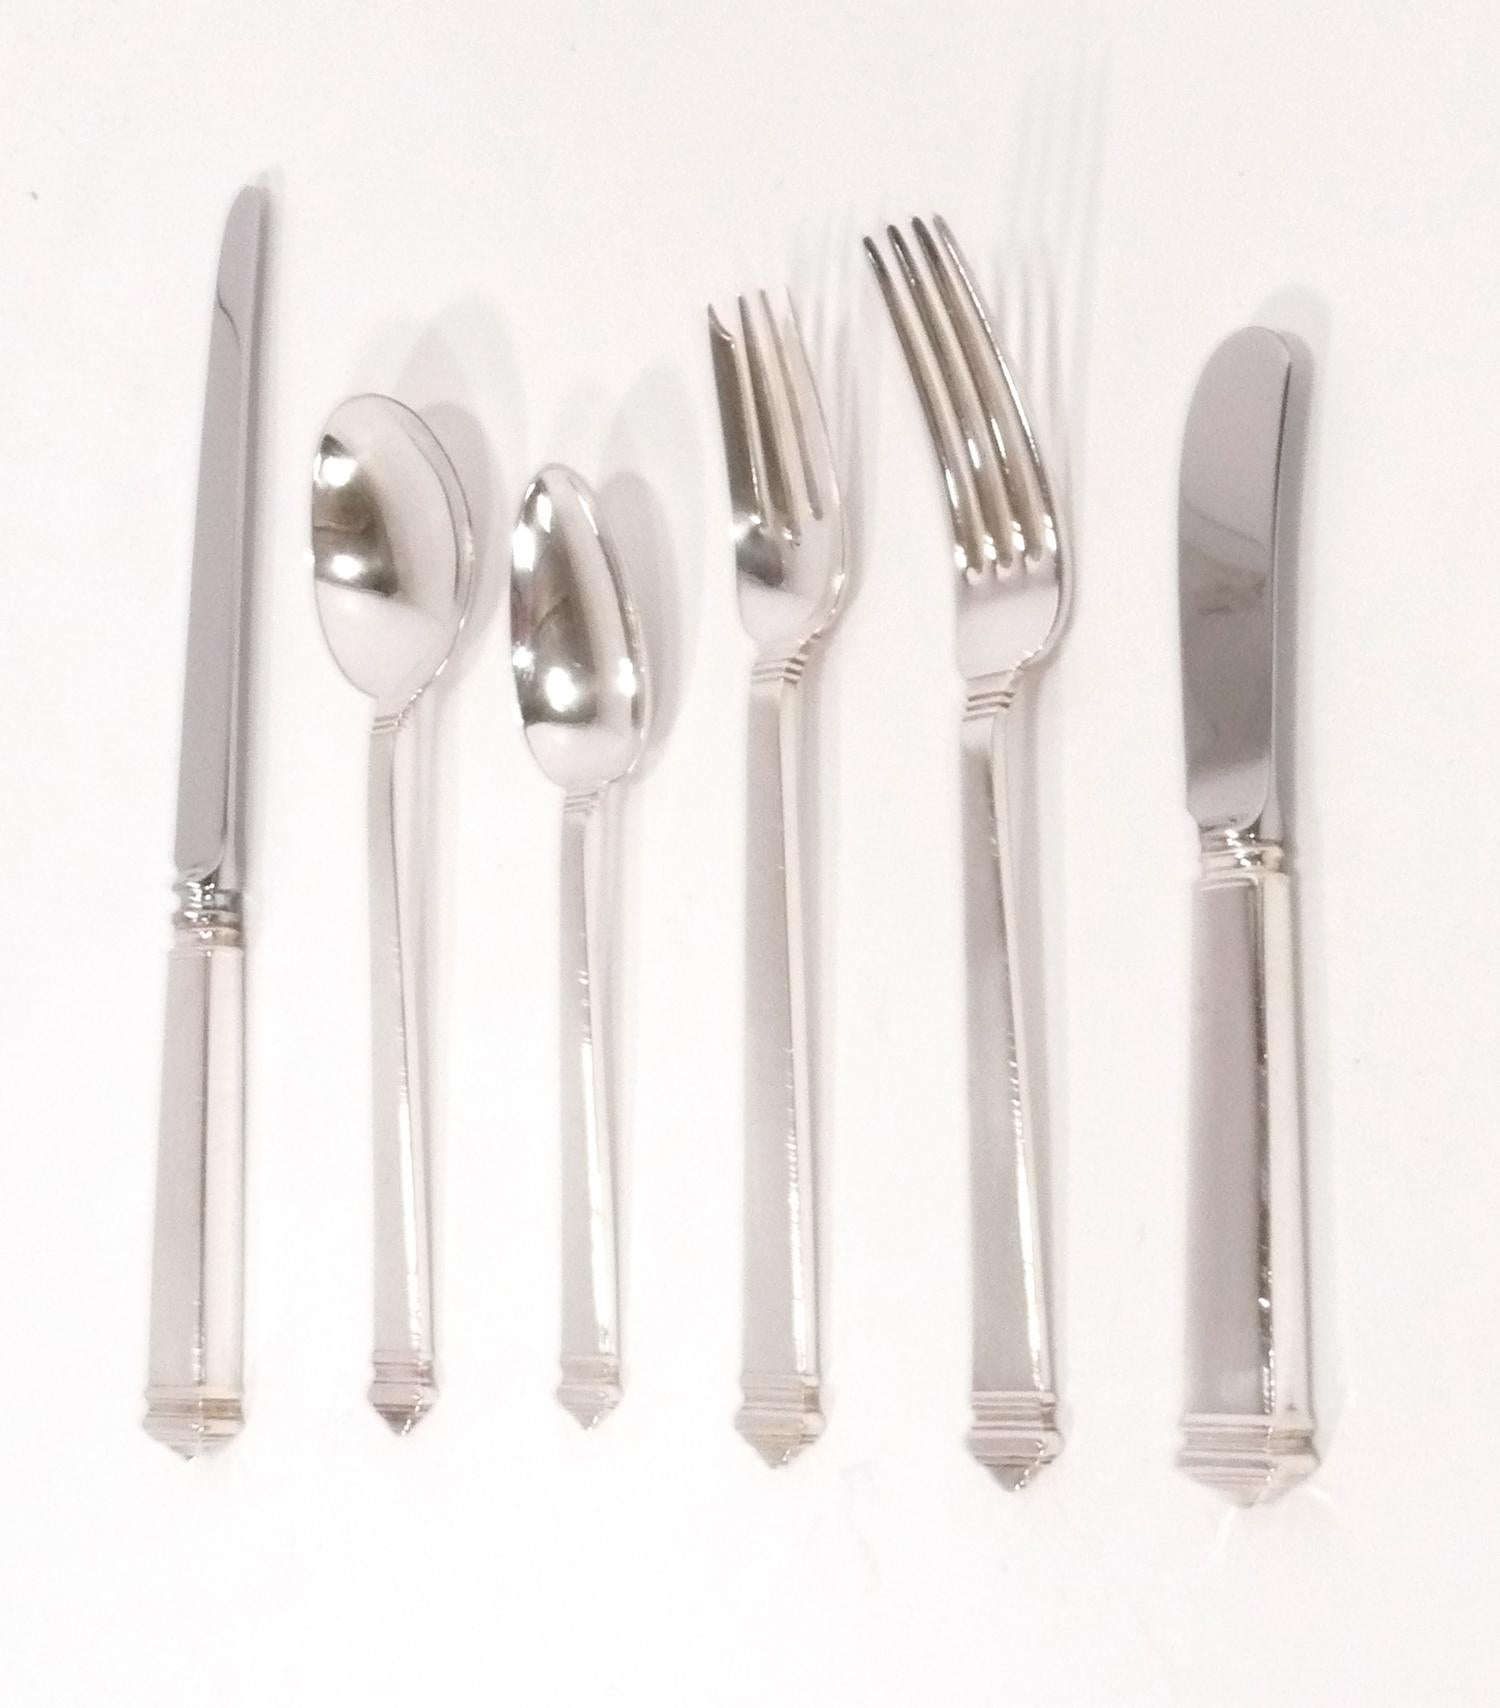 Tiffany Hampton pattern sterling silver flatware, American, circa 1930s. No monograms. This is a large complete set with 96 pieces total, consisting of (12) forks - approx. 7 1/8